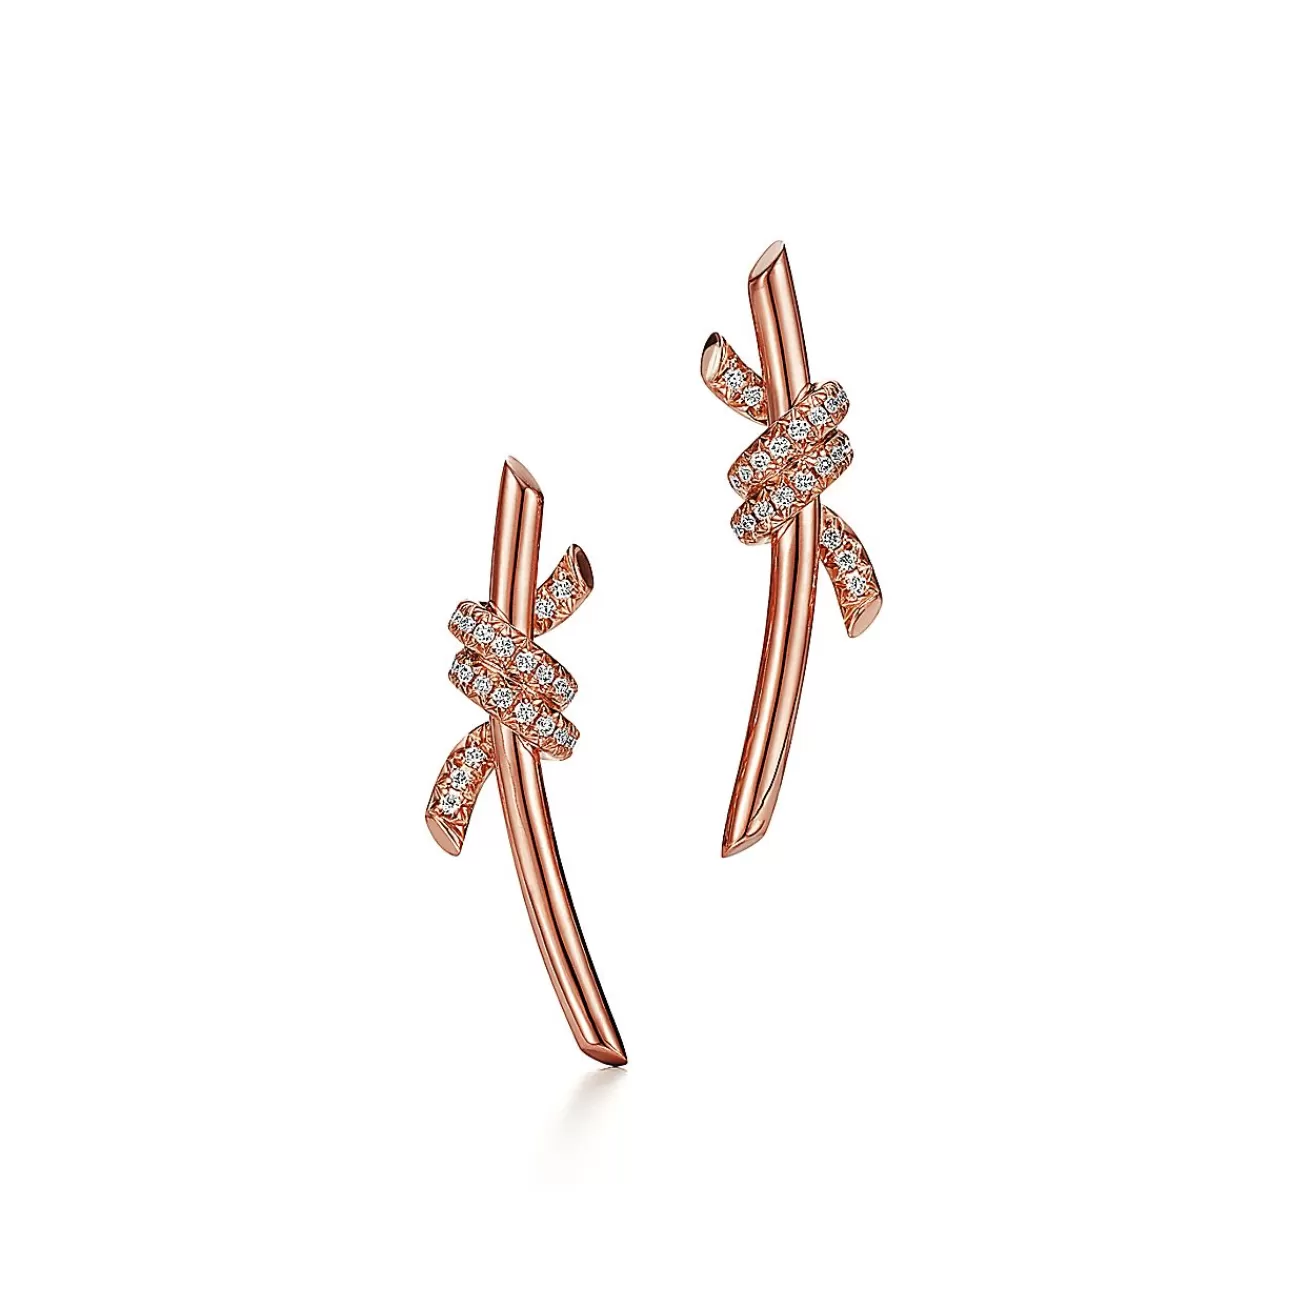 Tiffany & Co. Tiffany Knot Earrings in Rose Gold with Diamonds | ^ Earrings | Gifts for Her